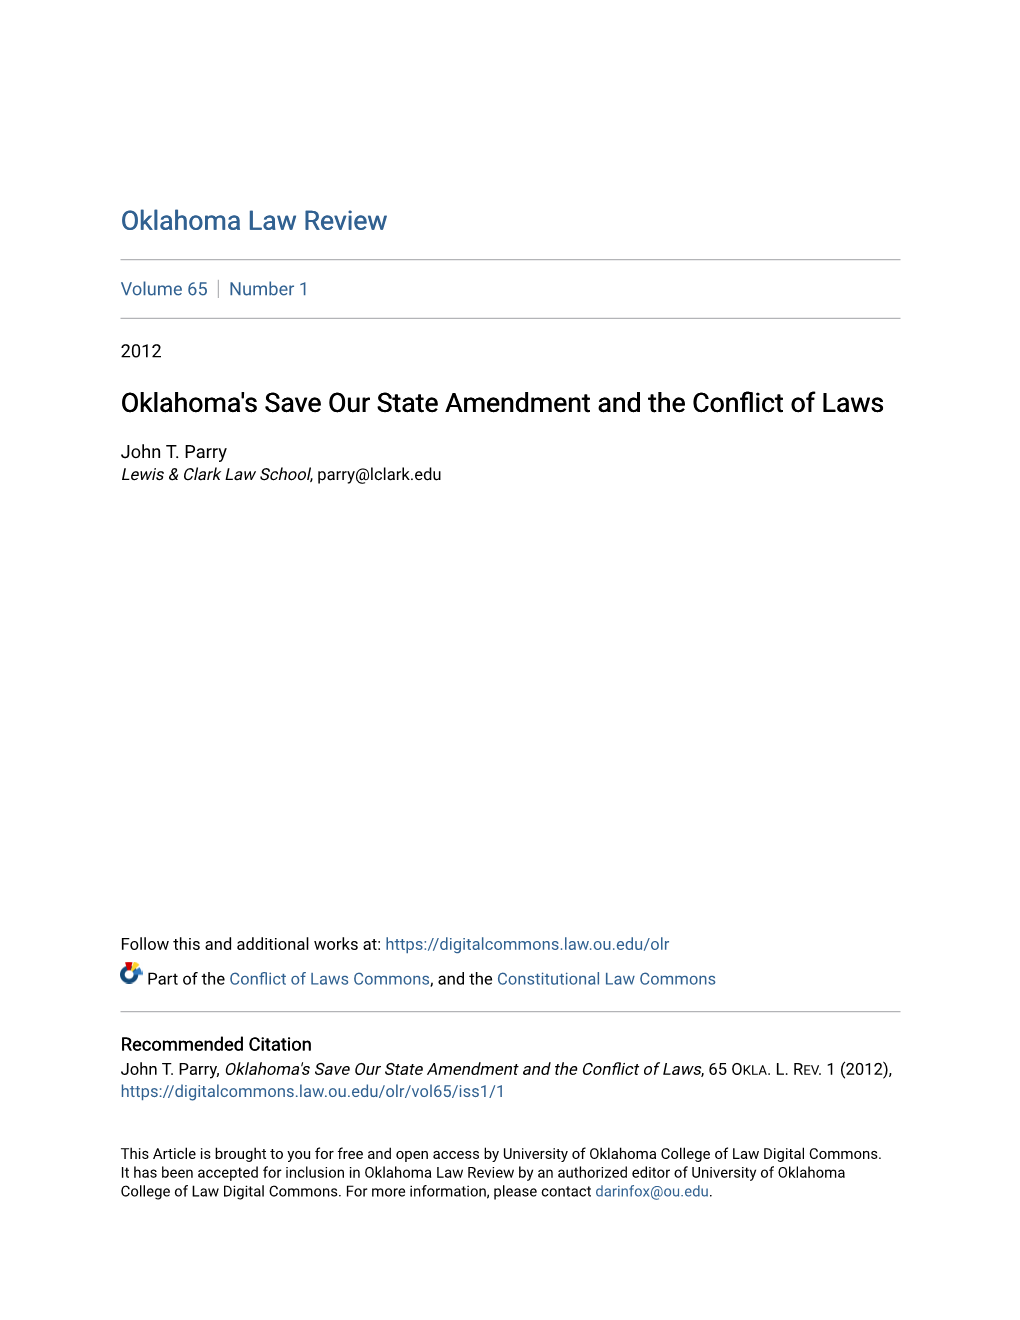 Oklahoma's Save Our State Amendment and the Conflict of Laws